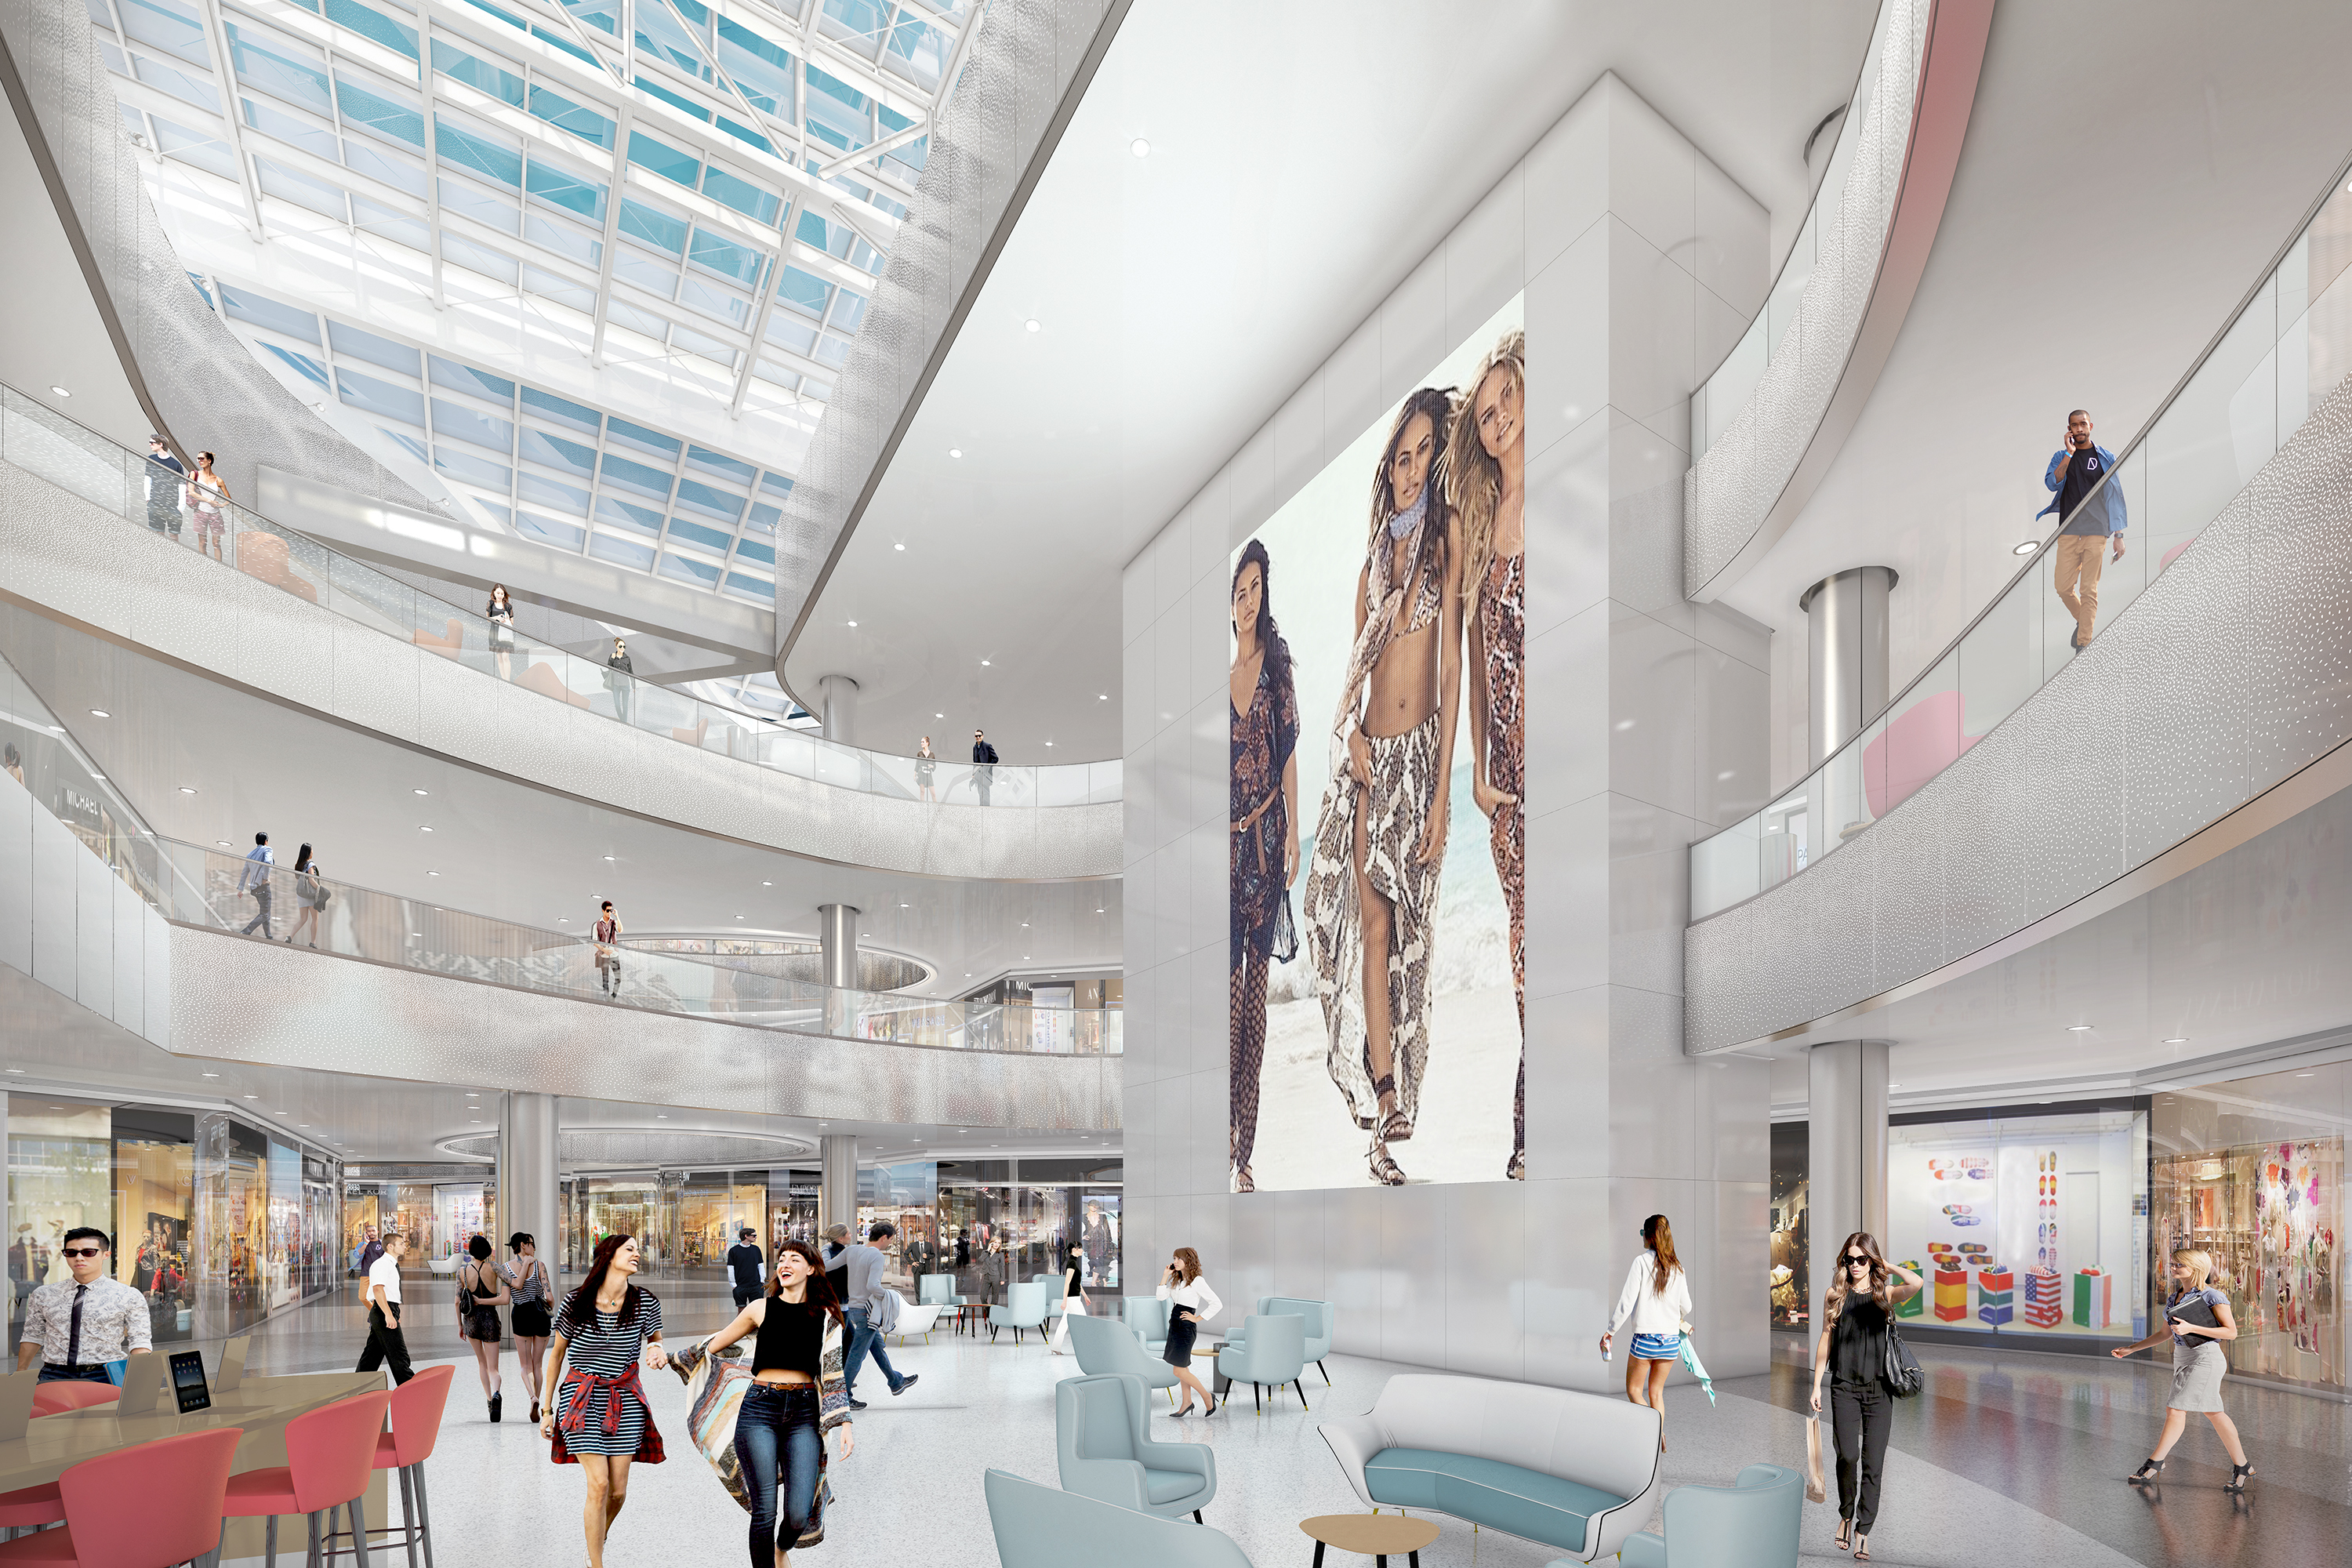 Taubman Unveils Plans for a $500 Million Re-Imagination of the